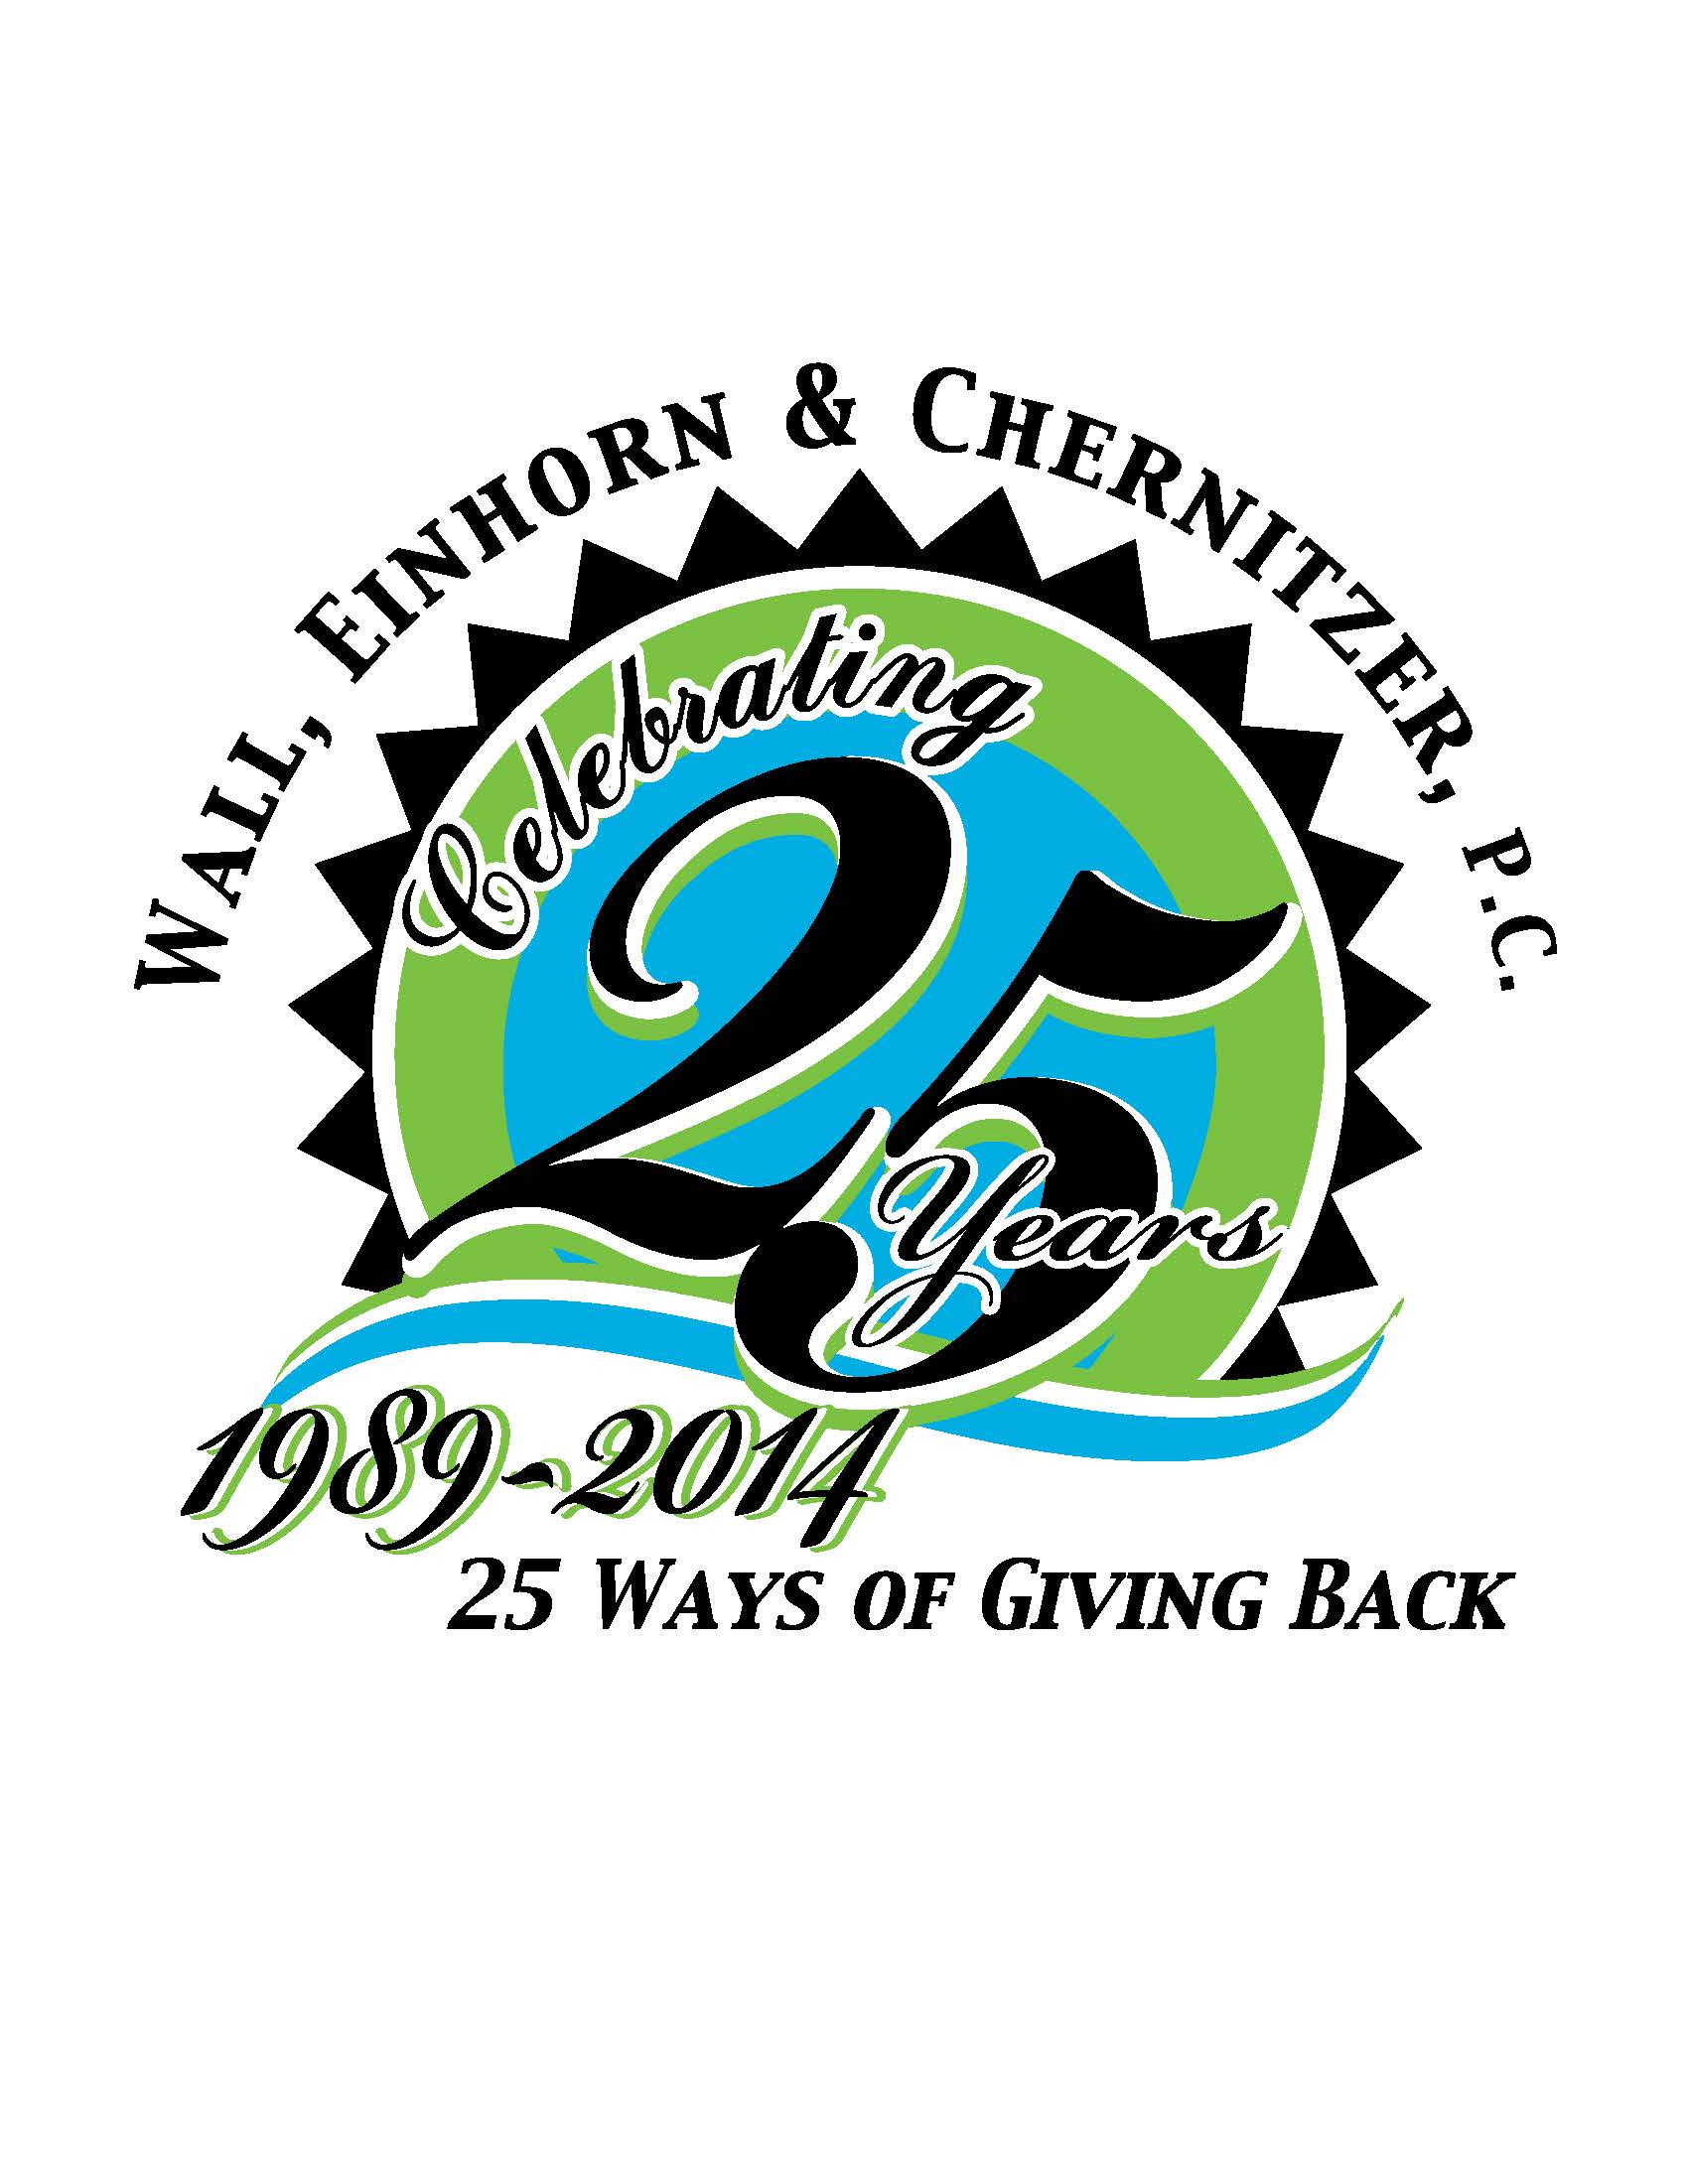 Wall, Einhorn & Chernitzer, P.C. "25 for 25" Silver Anniversary Campaign to Benefit Local Charities